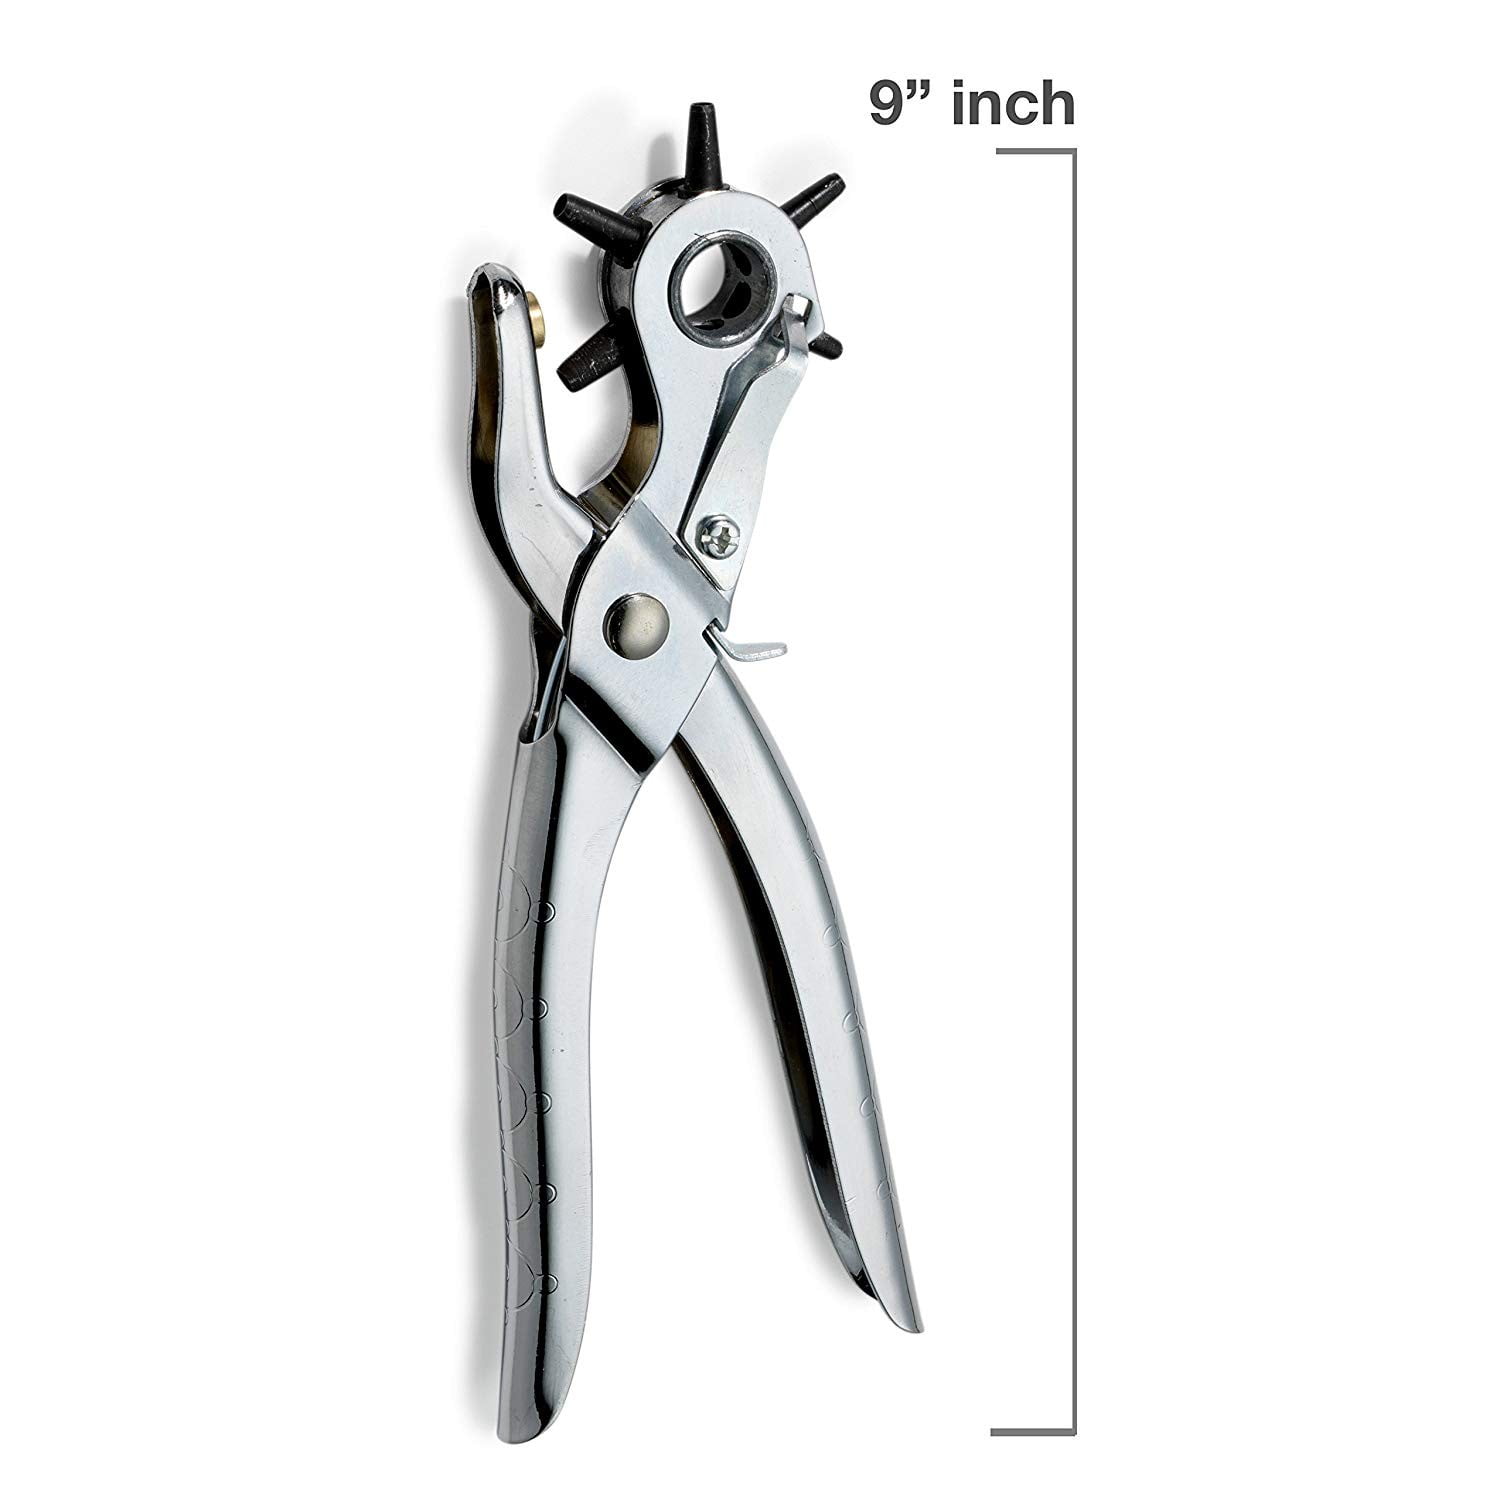 Generic Leather Hole Punch,Belt Hole Puncher for Leather, Revolving Punch  Plier Kit,Leather Punch Plier for Leather, Belts, Watches, Ha